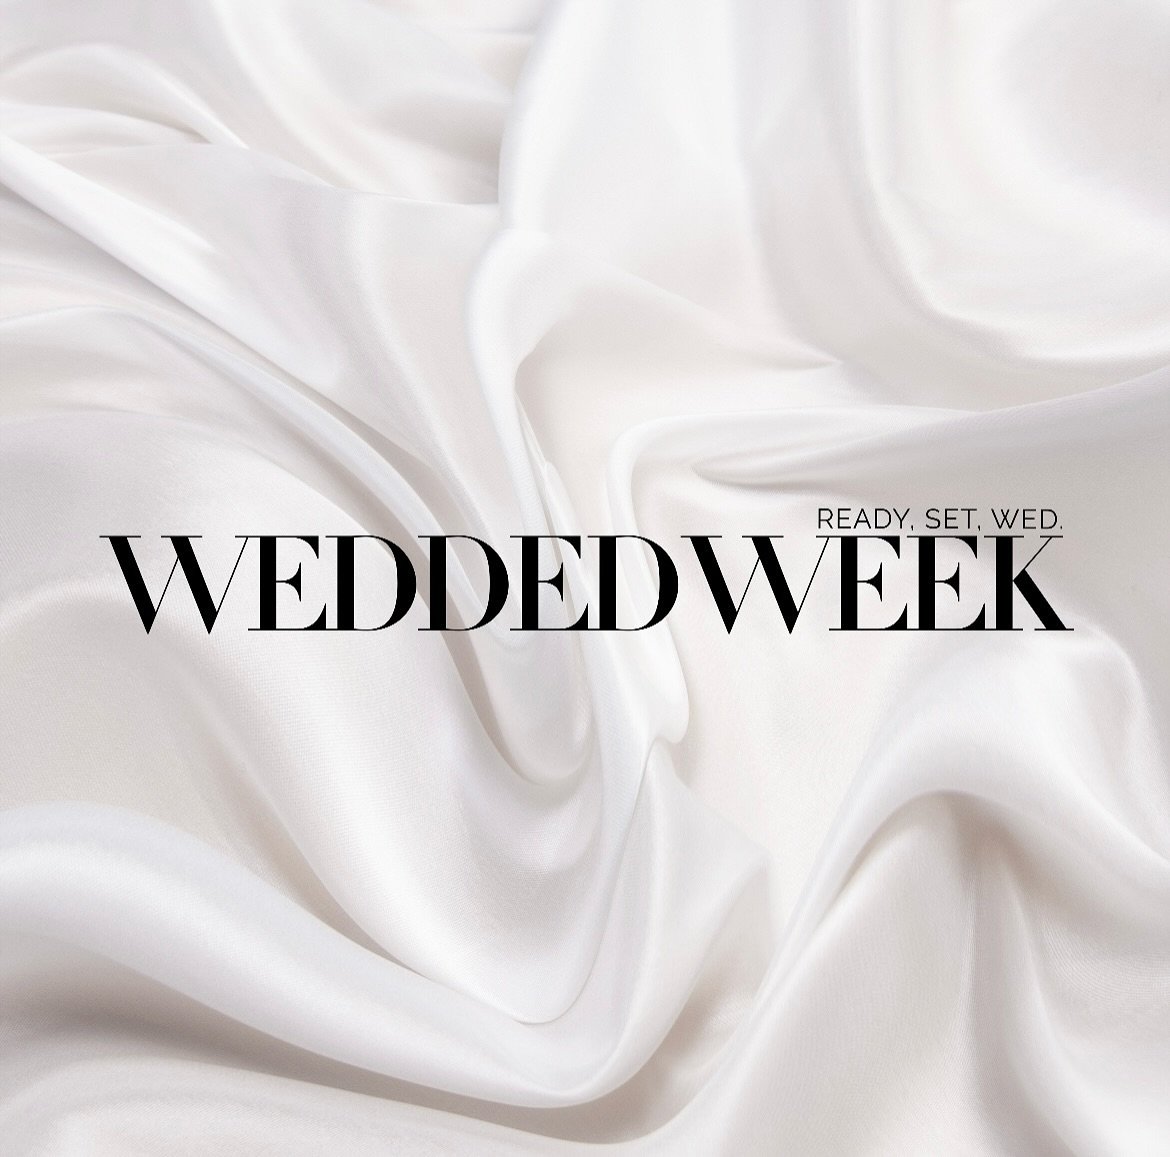 I know it&rsquo;s not as exciting as Taylor&rsquo;s second album - but there&rsquo;s only one sleep left until the end of @weddedweek And only one day left to get $500 off any of our Wedding photography packages.
.
Link in bio for our Wedding info Gu